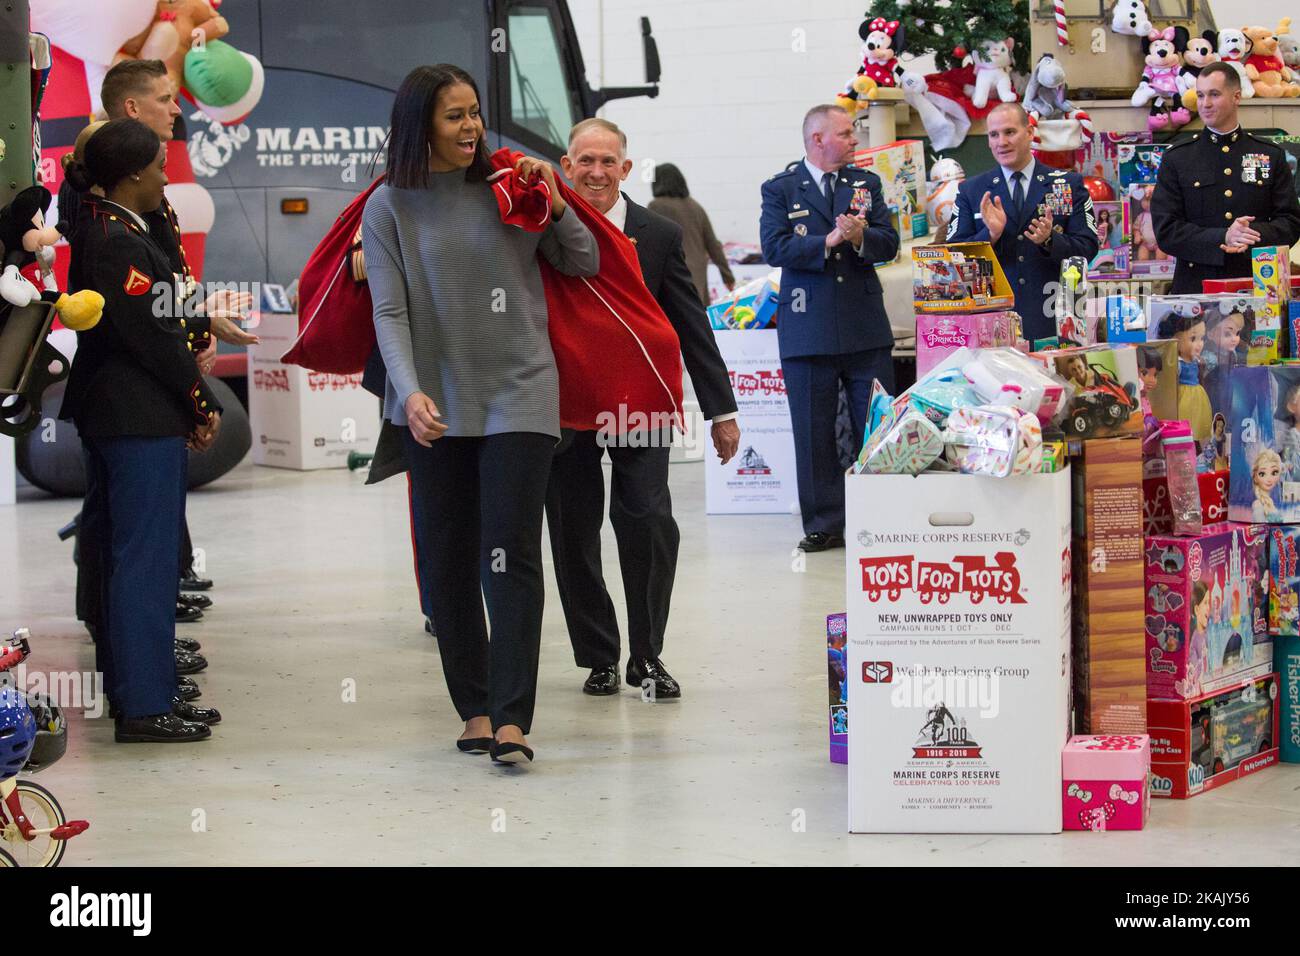 On Wednesday, Dec. 7 at Joint Base Anacostia-Bolling, First Lady Michelle Obama, followed by Lieutenant General H.P. (Pete) Osman, United States Marine Corps, Deputy Commandant for Manpower and Reserve, and some U.S. Marines, entered the room with bags of toys to sort for the Marine Corps ReserveÂ’s Â“Toys for TotsÂ” program. This was the eighth year Mrs. Obama has participated in the program, sorting toys for under-privileged children across the country. (Photo by Cheriss May/NurPhoto) *** Please Use Credit from Credit Field *** Stock Photo